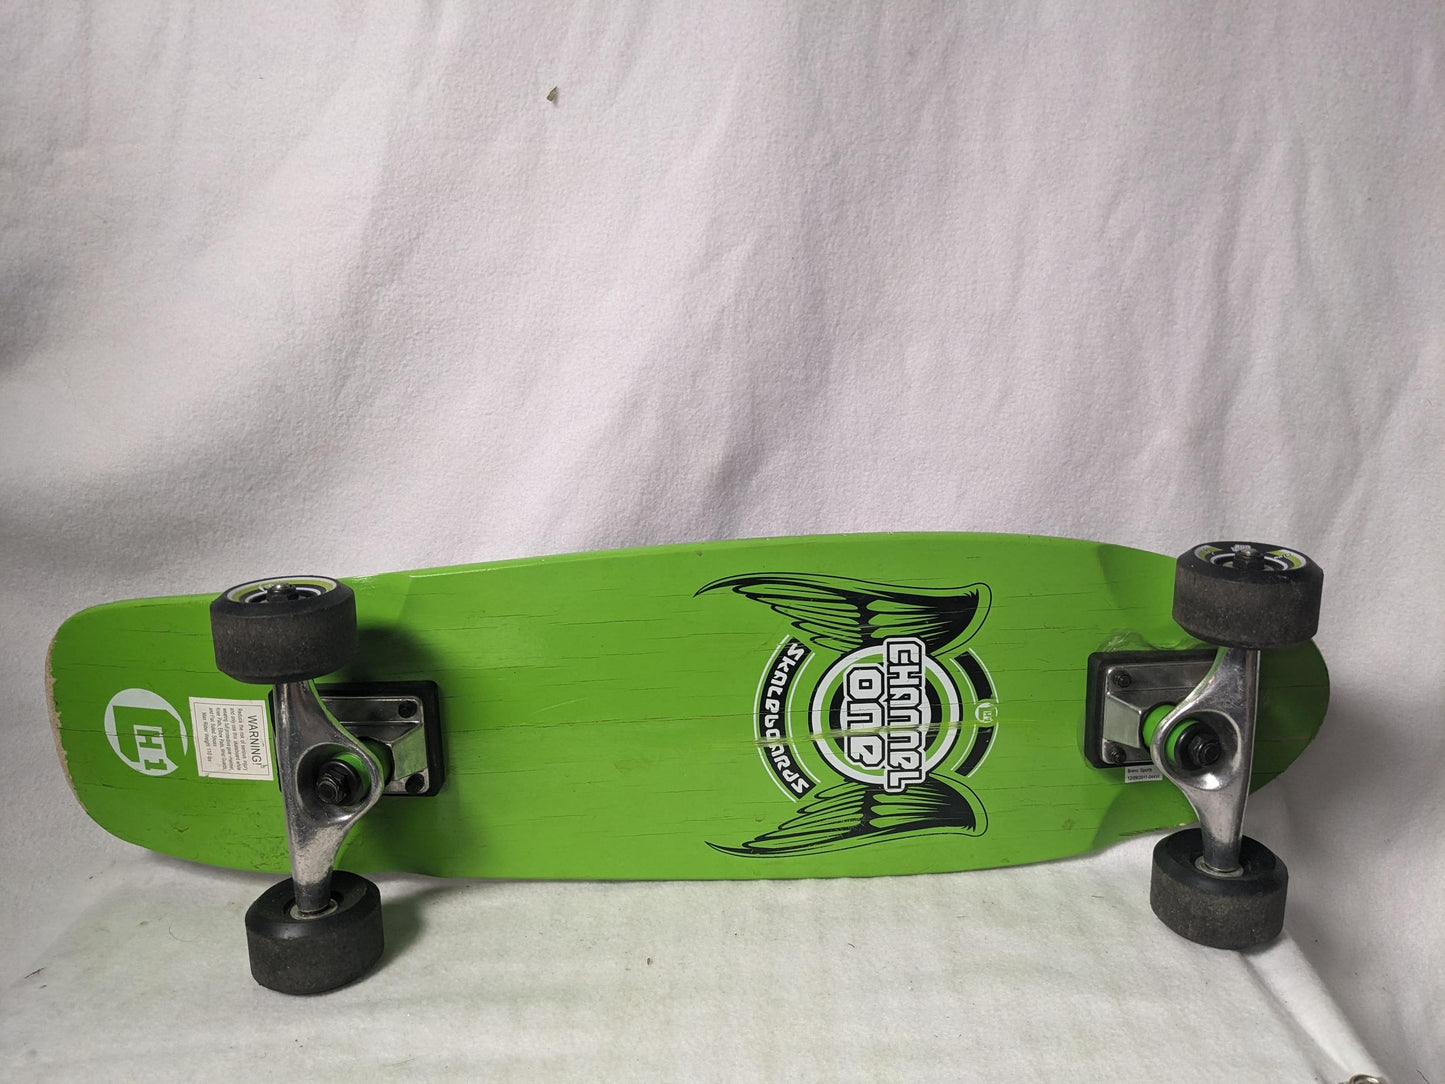 Channel One Skateboard Size 28 In Color Green Condition Used